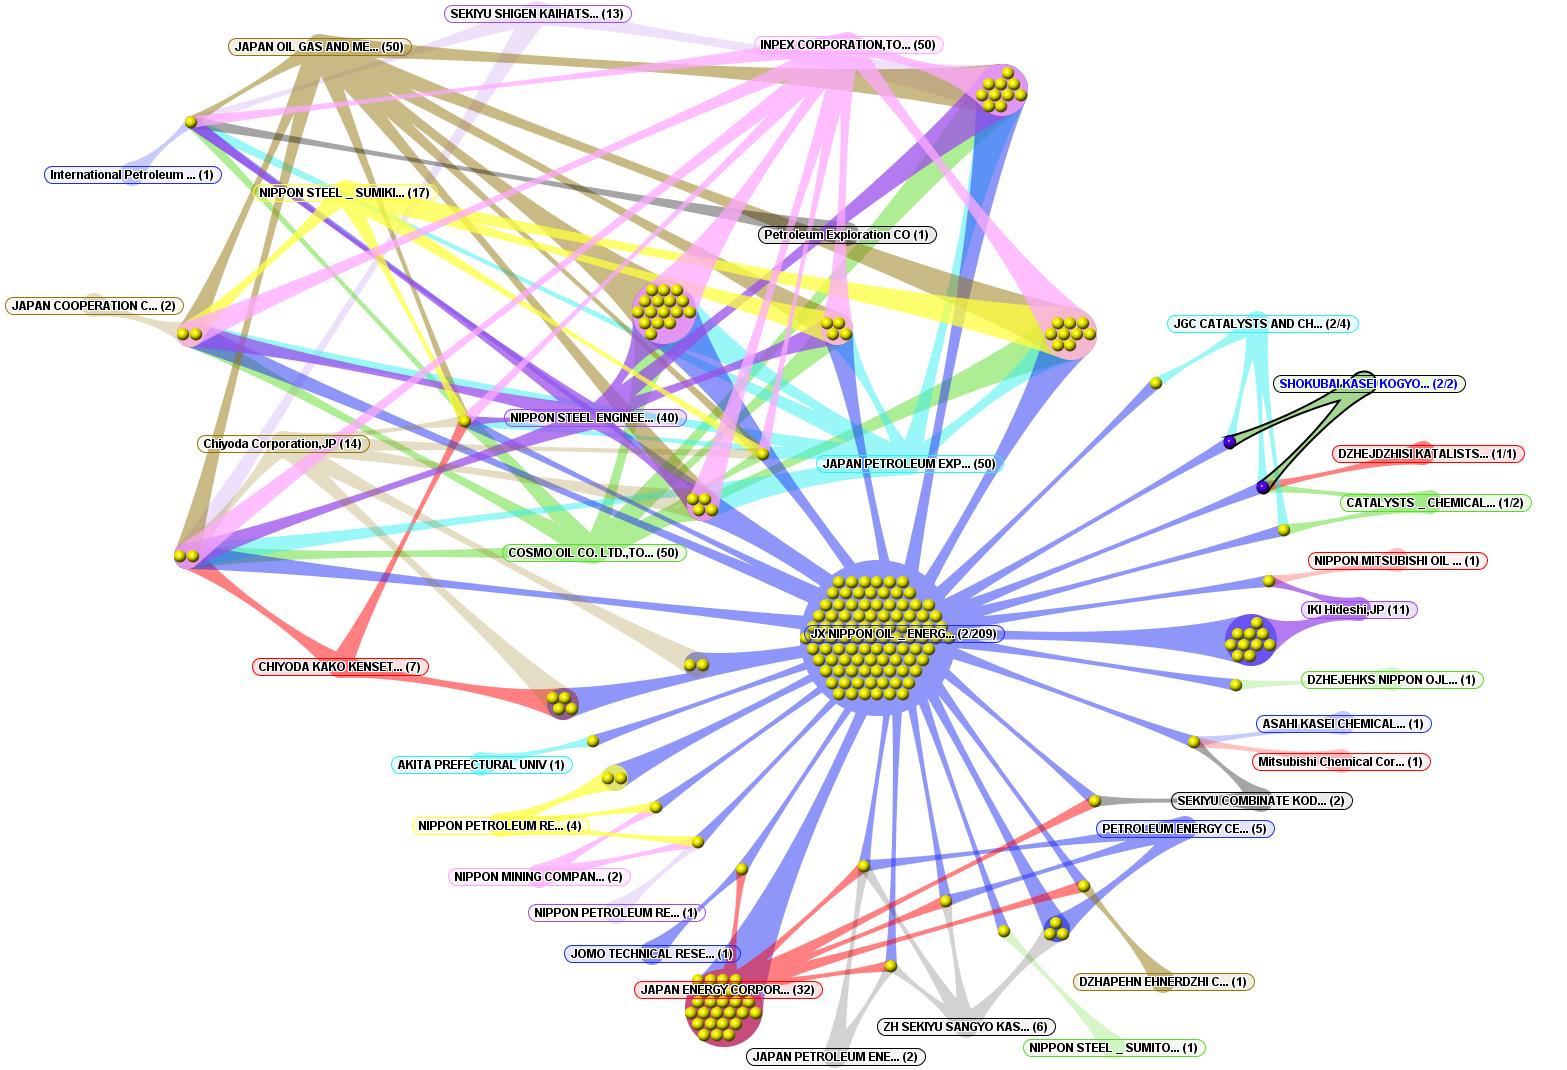 Figure 9: Collaboration map depicting collaborations with JX Nippon - long description follows